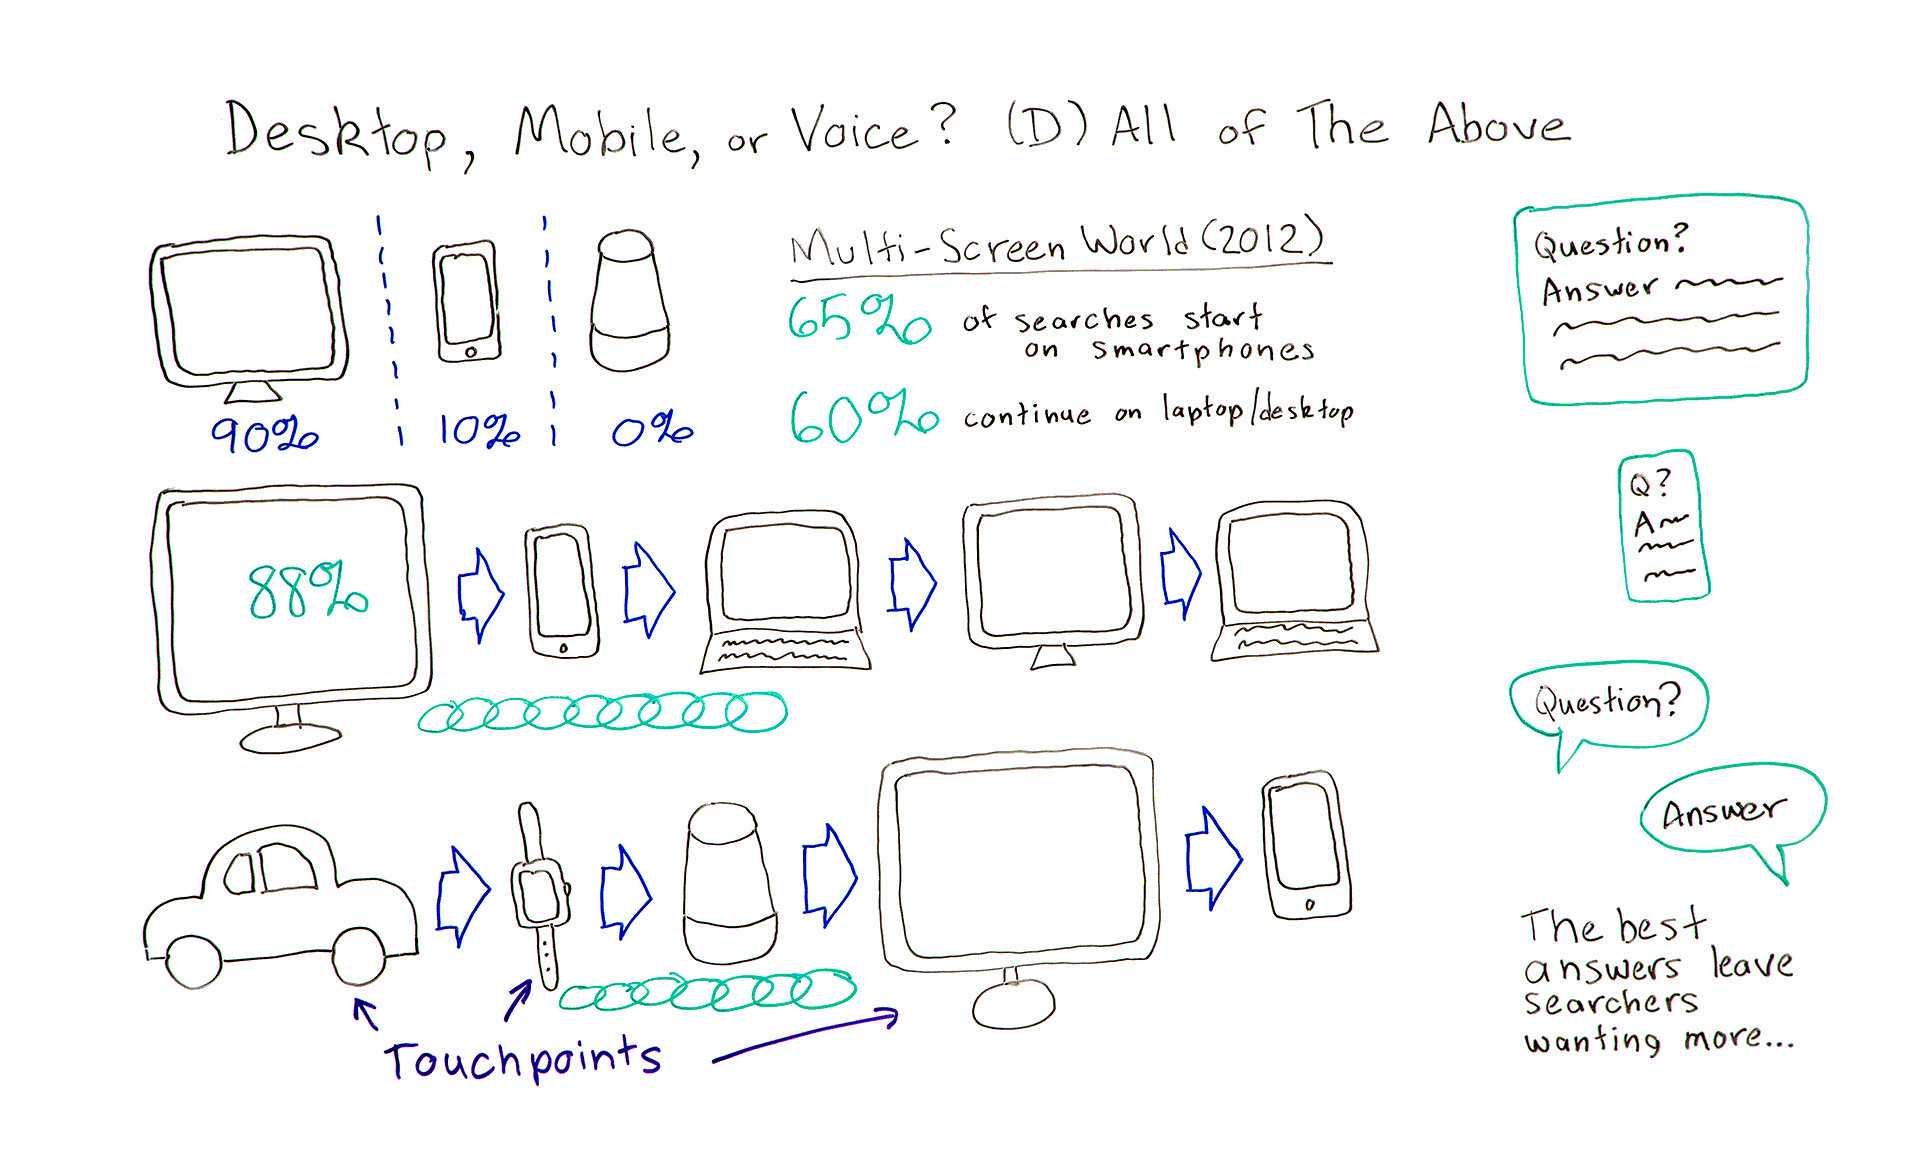 Desktop, Mobile, or Voice? All of the above.